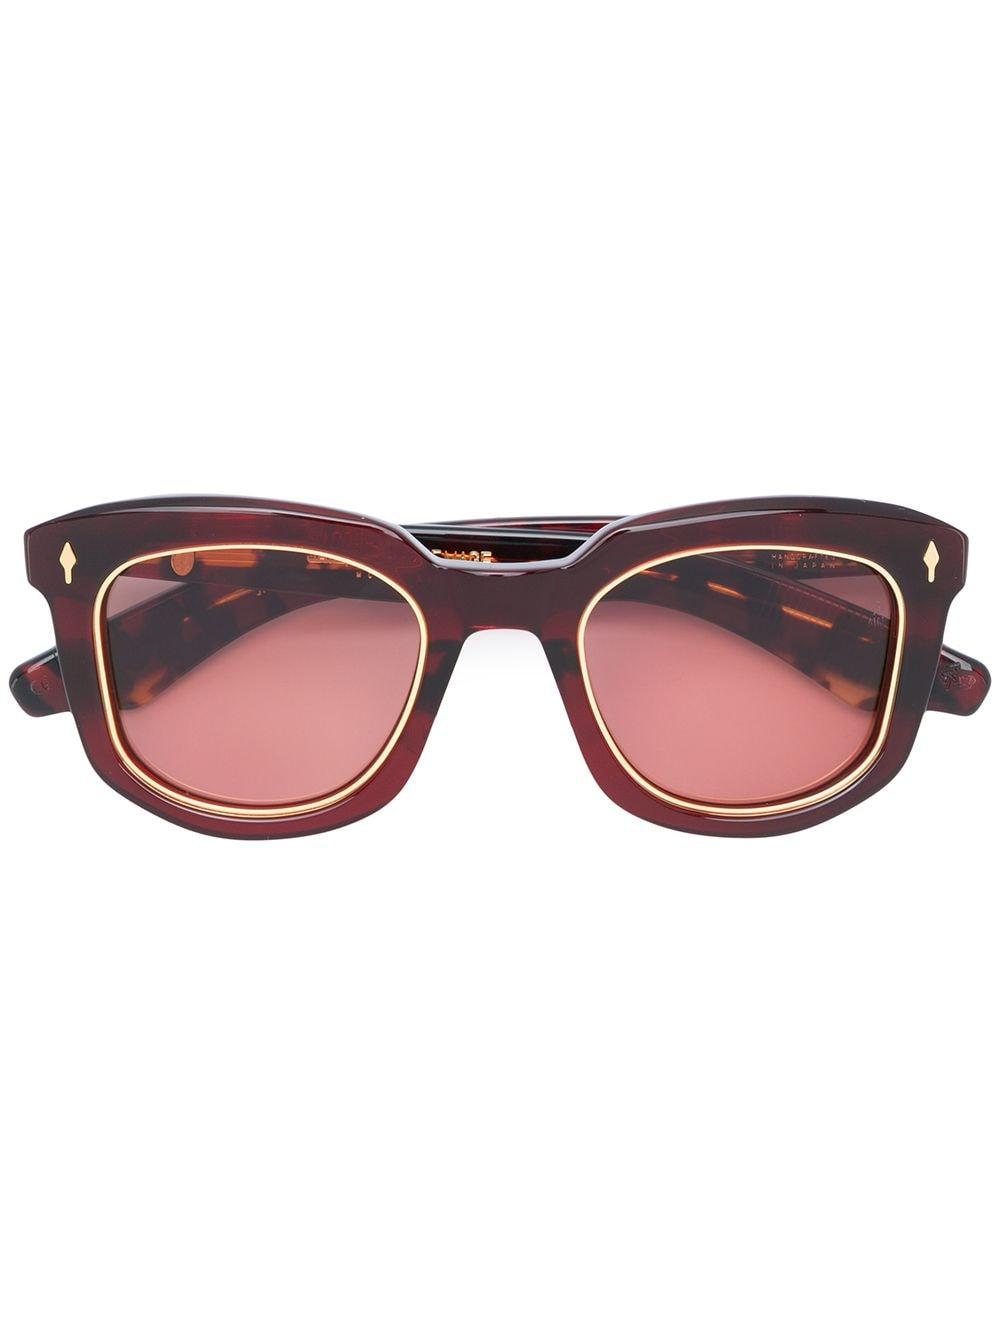 Jacques Marie Mage Pasolini Sunglasses in Red | Lyst